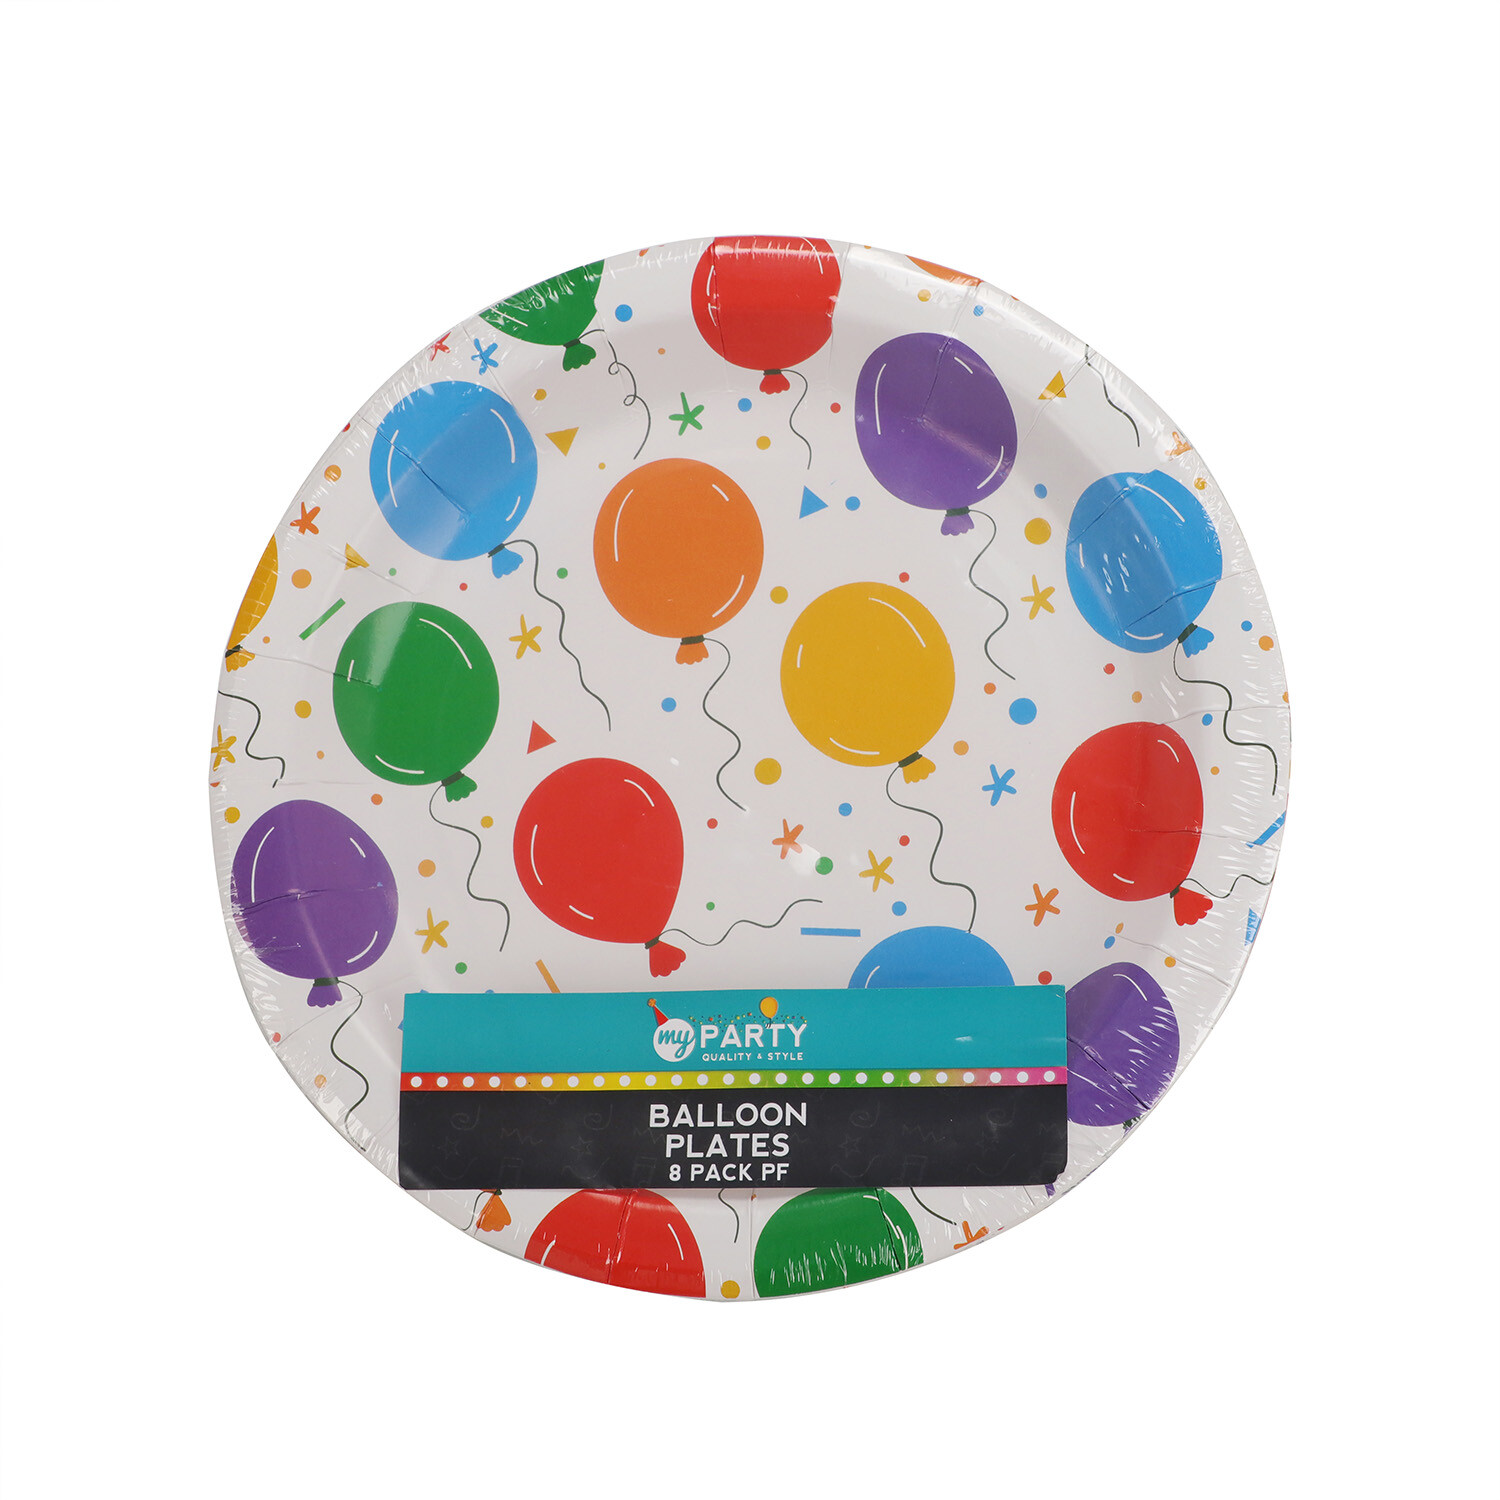 Pack of 8 Balloons Plates Image 1